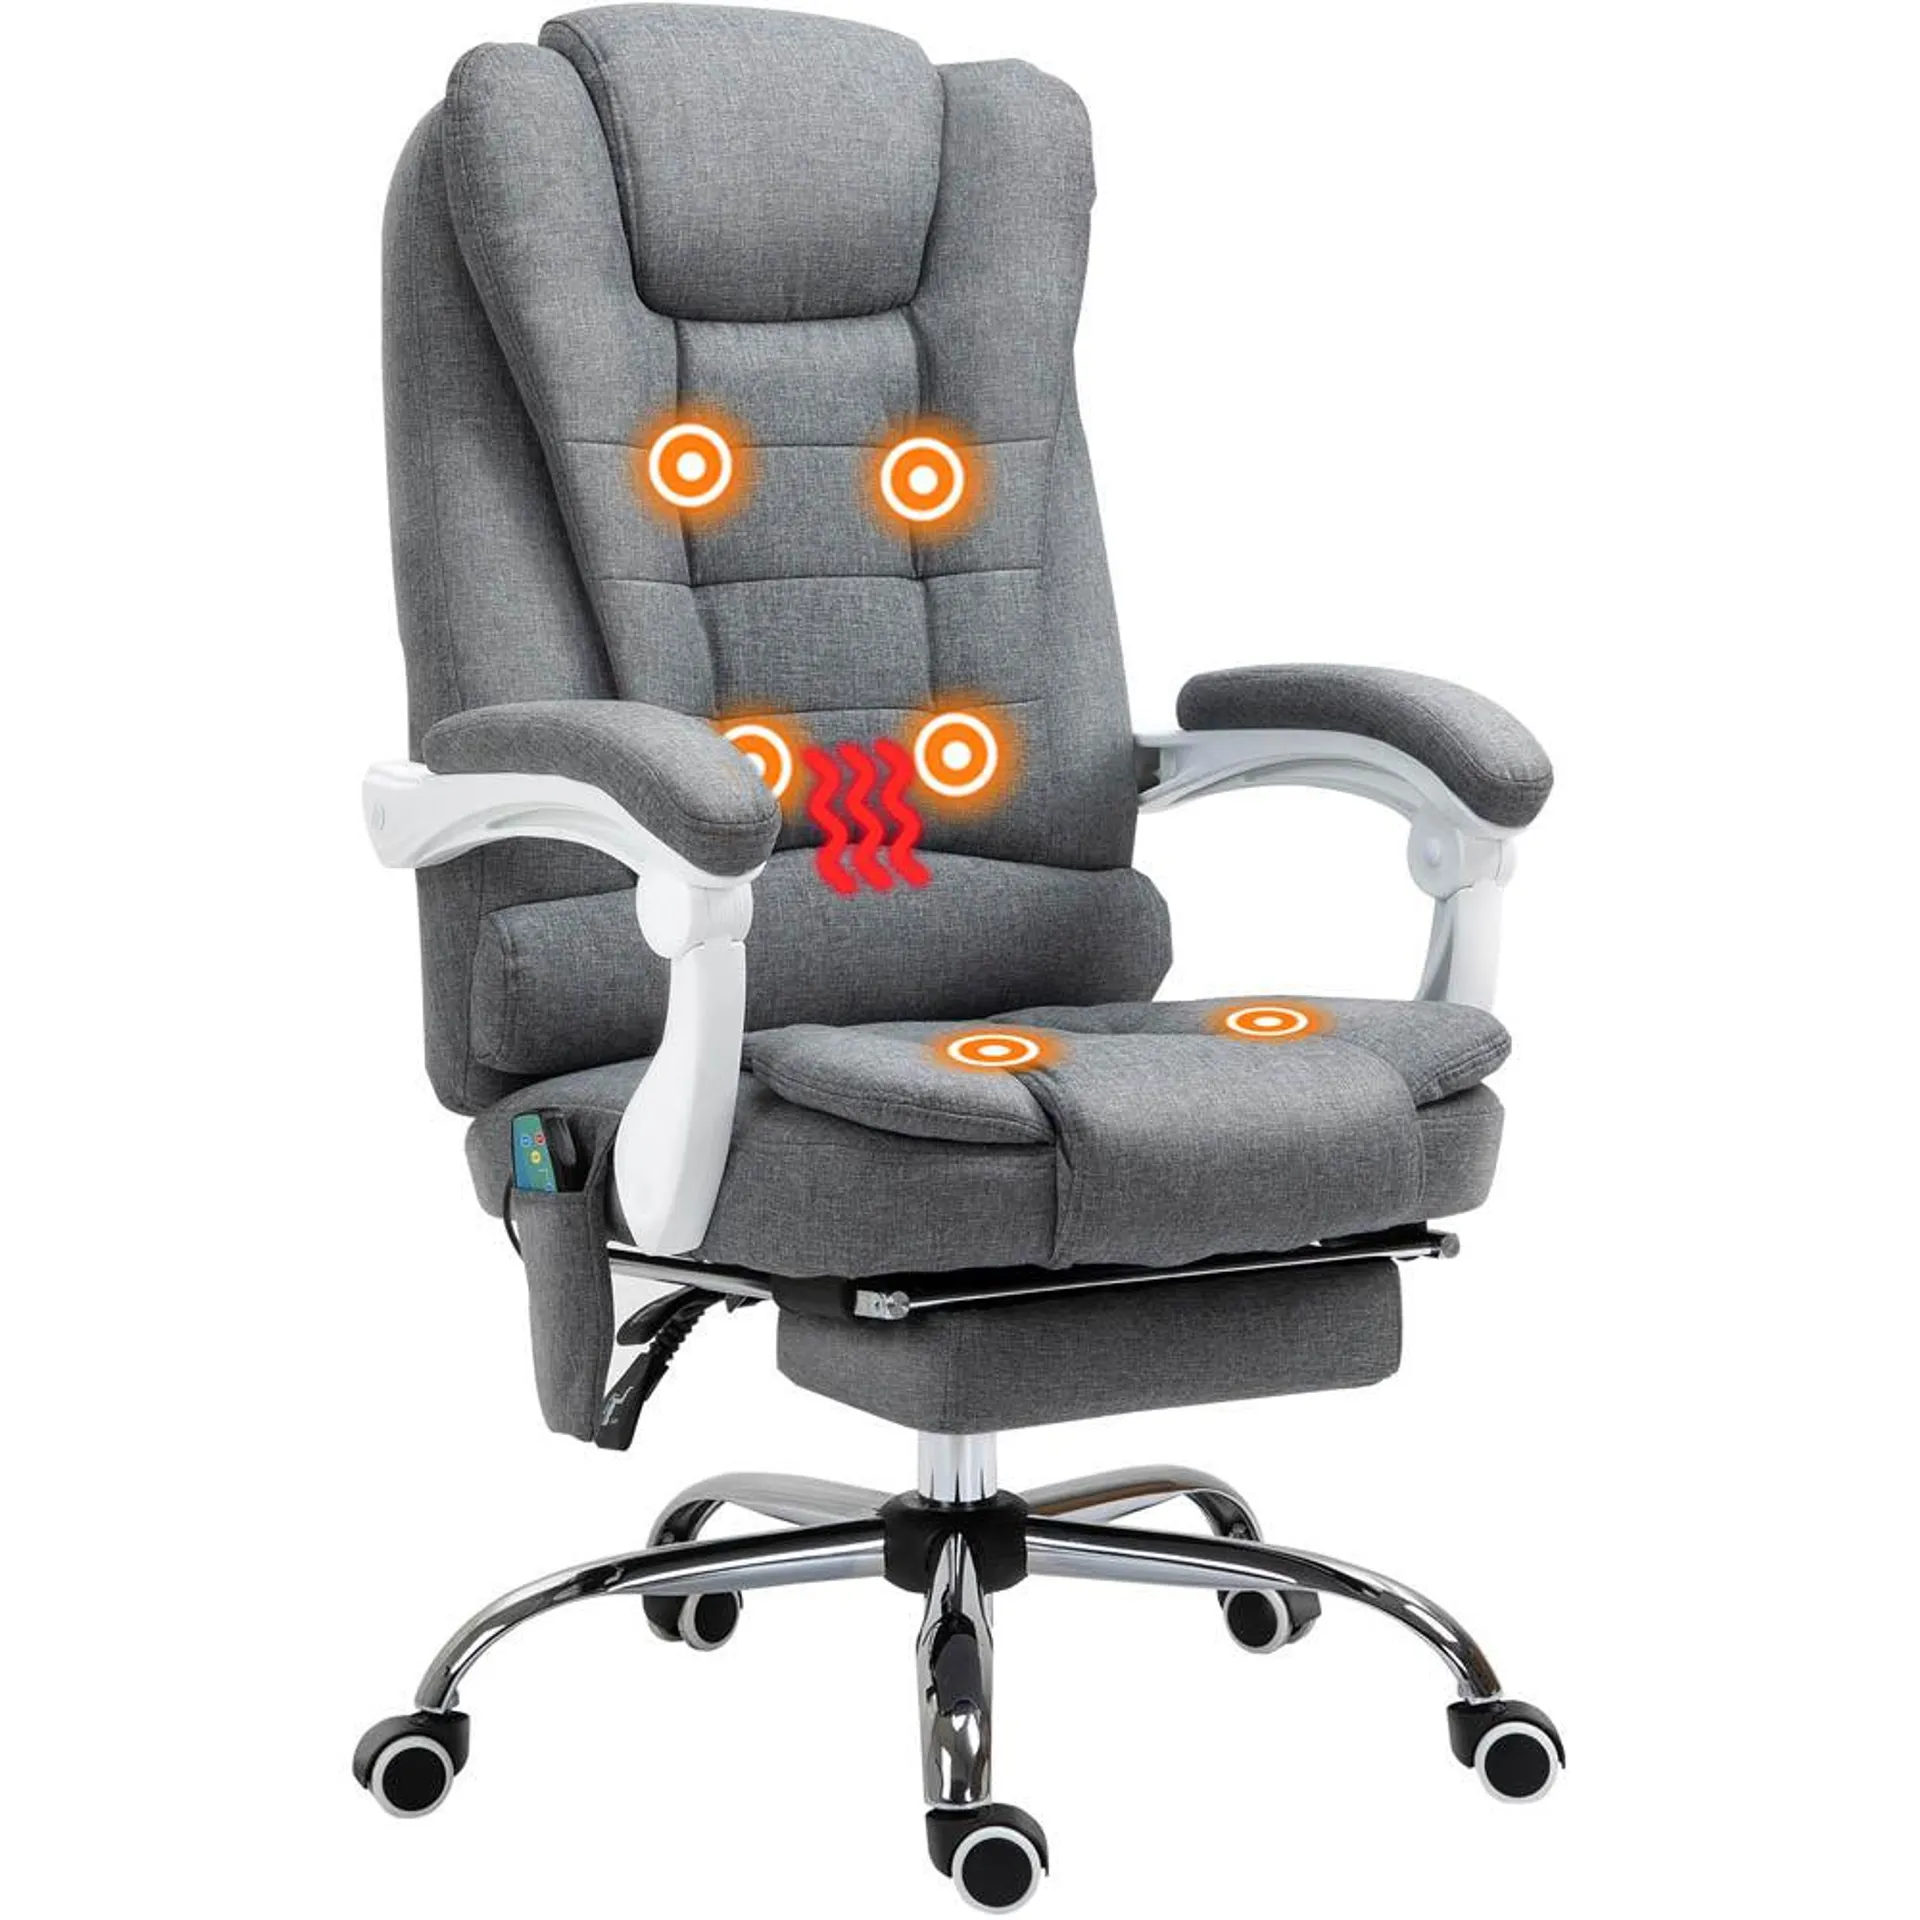 ProperAV Extra Ergonomic Adjustable Reclining Executive Office Chair with Heated 6 Point Vibration Massage Function & Footrest - Grey